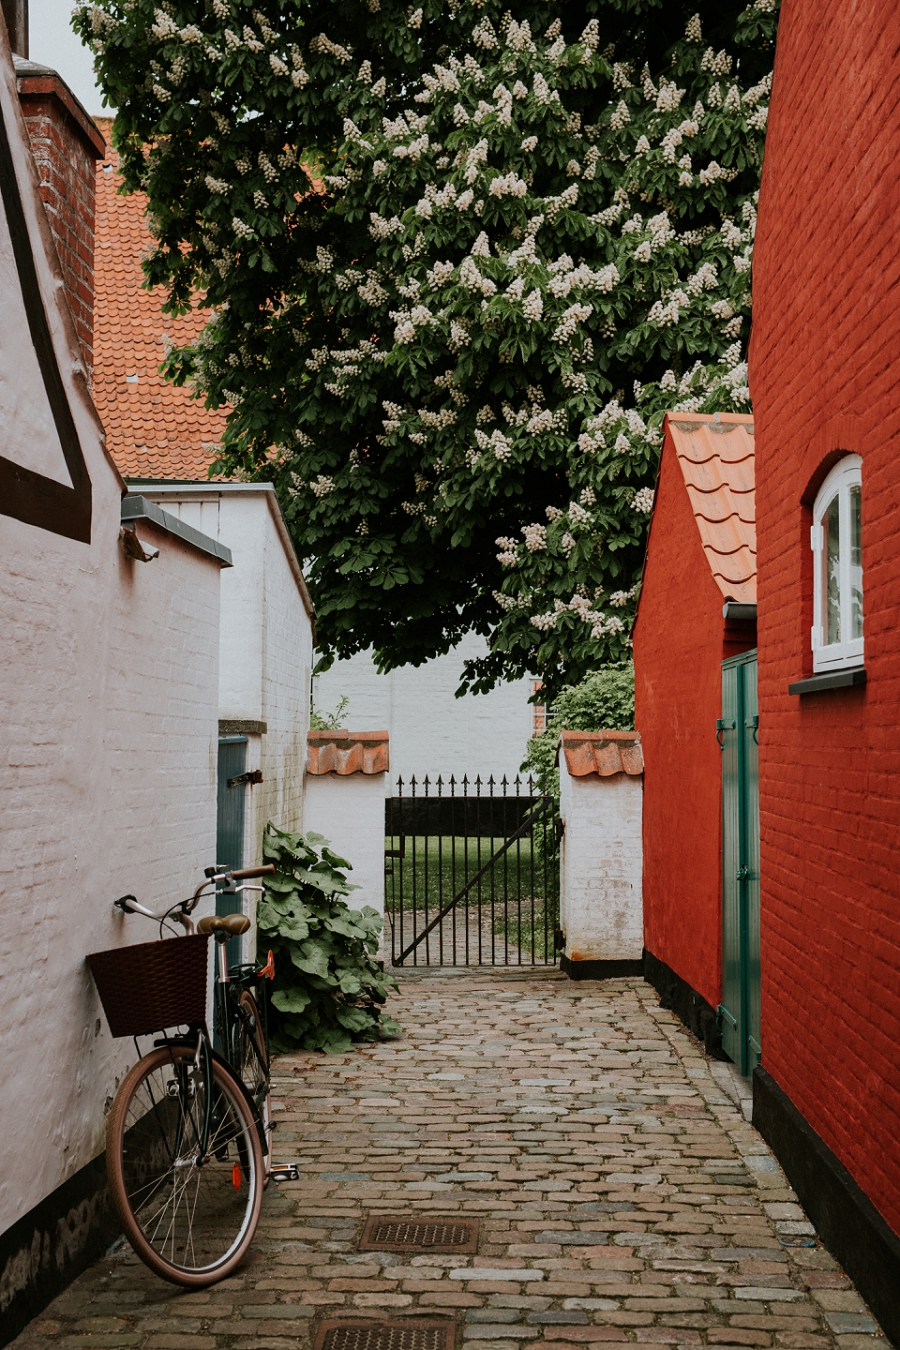 Bicycle in old town | world's most romantic wedding destinations | Danish Island Weddings